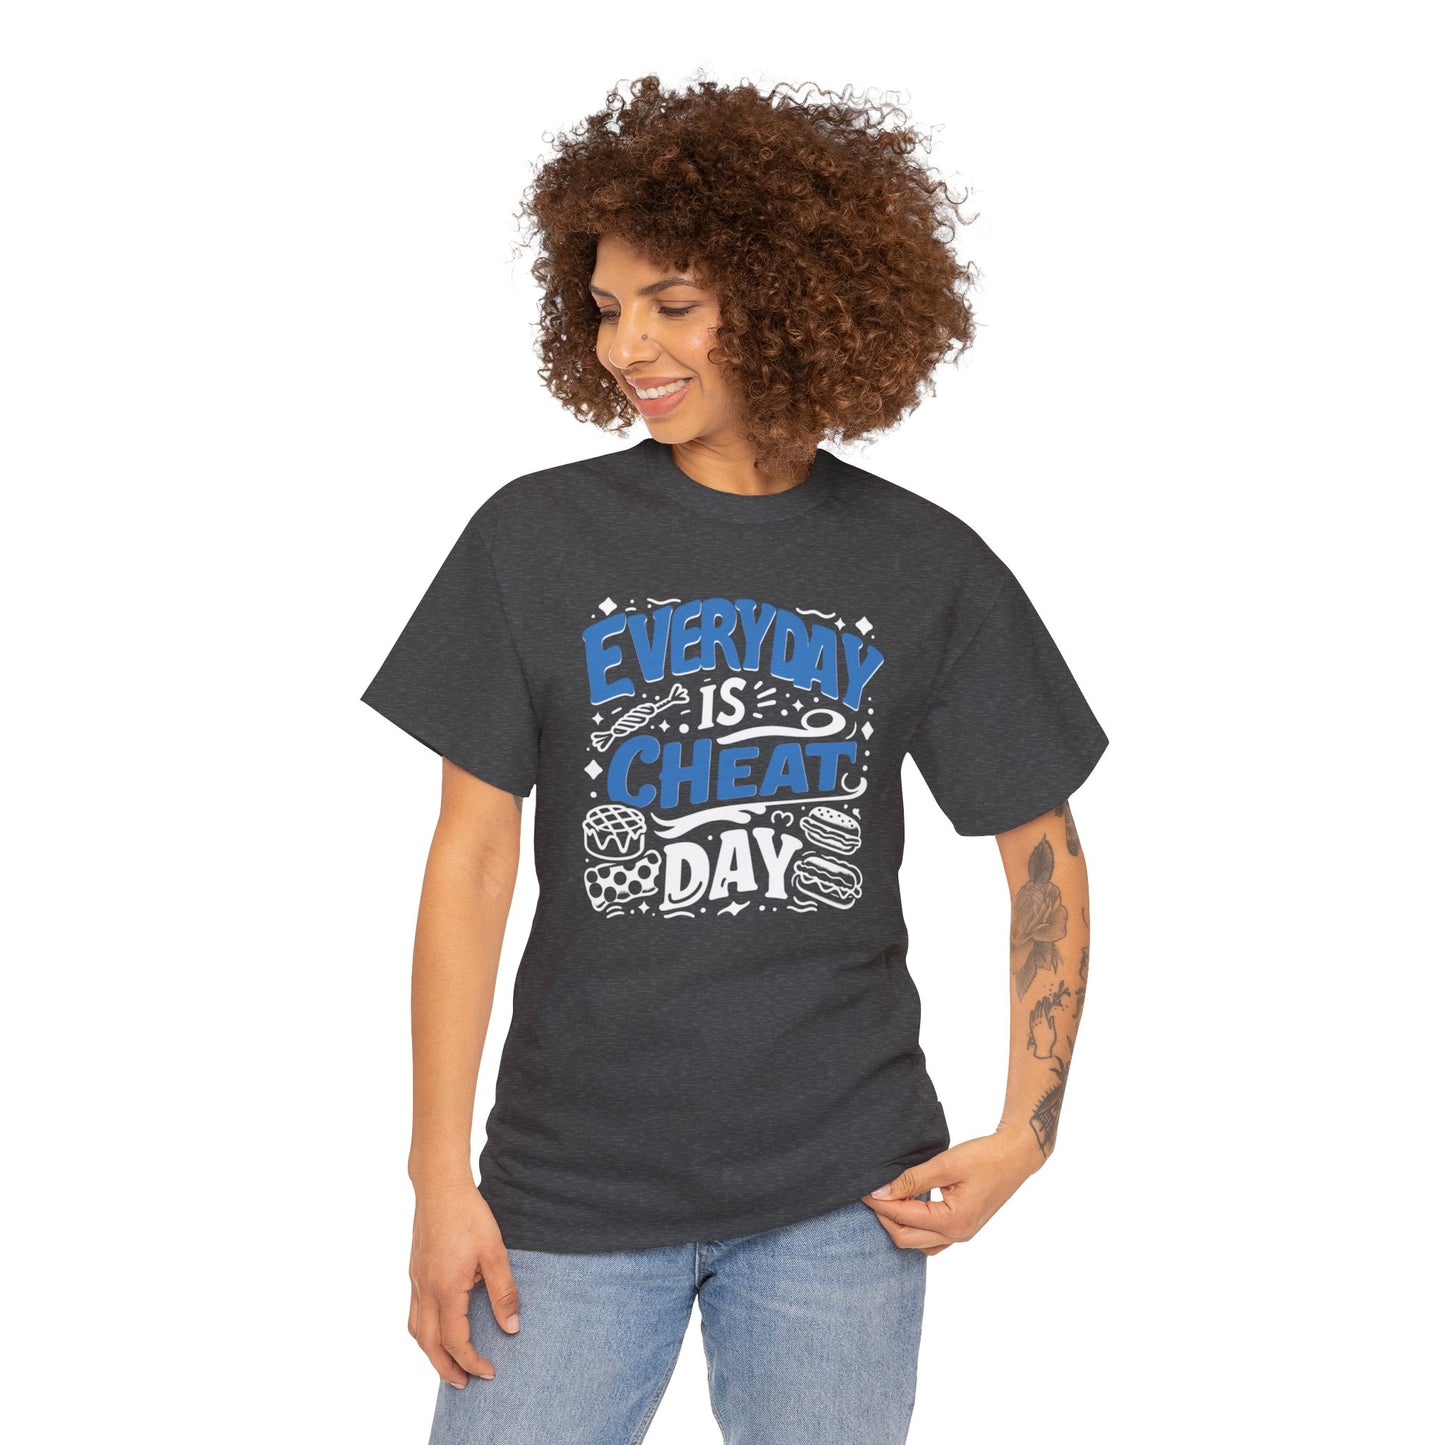 24/7 Cheat Day: Satisfy Your Cravings-Unisex Graphic Tee